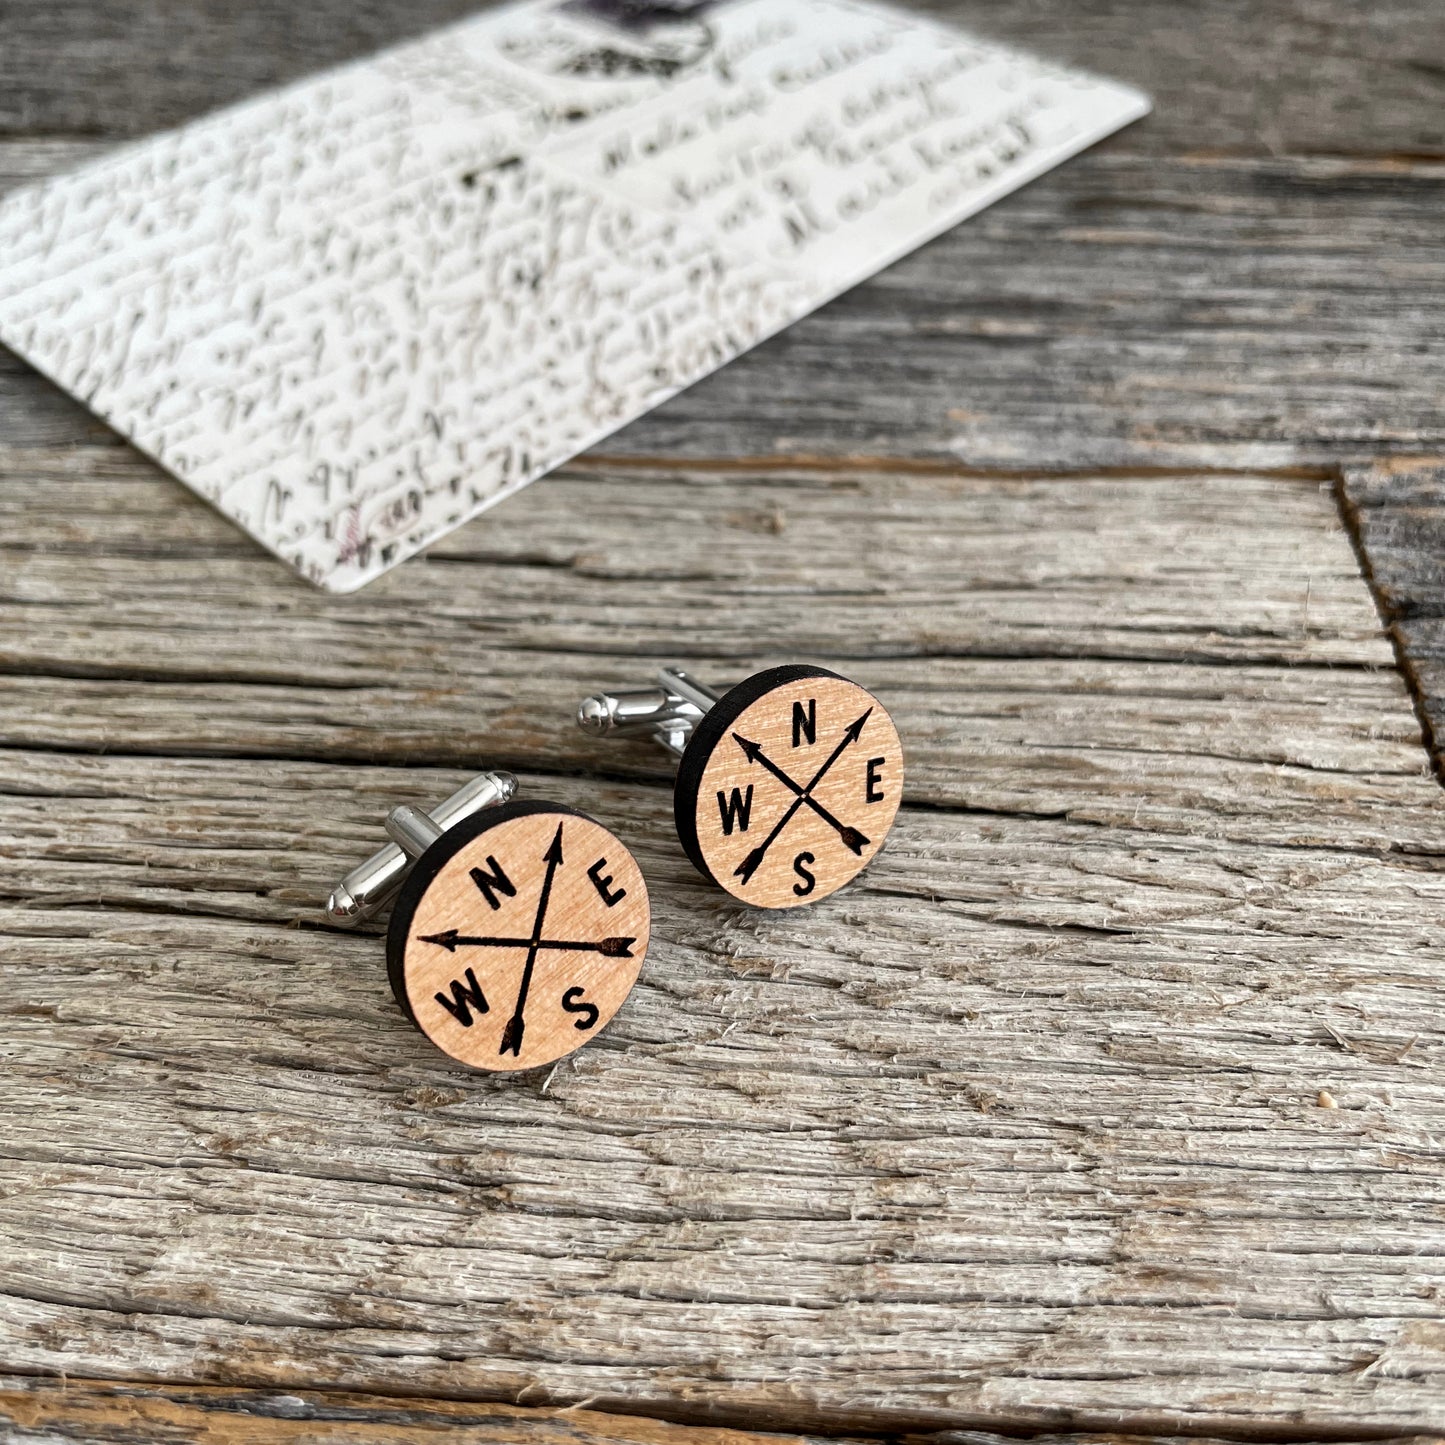 Laser engraved wooden cufflinks with compass